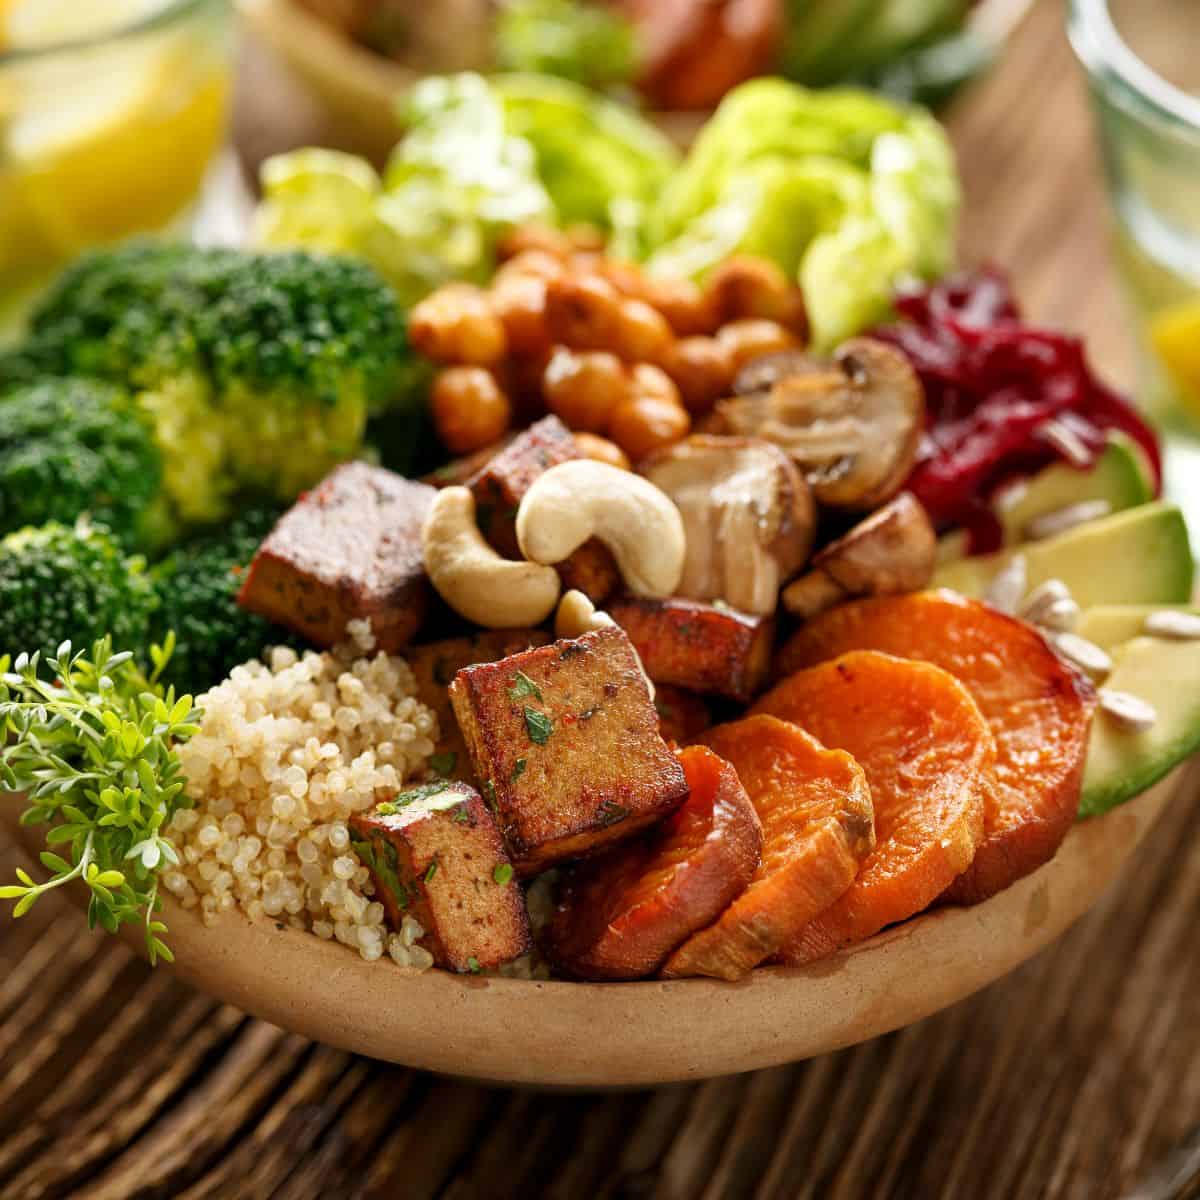 Buddha bowl of mixed vegetables, healthy and nutritious vegan meal